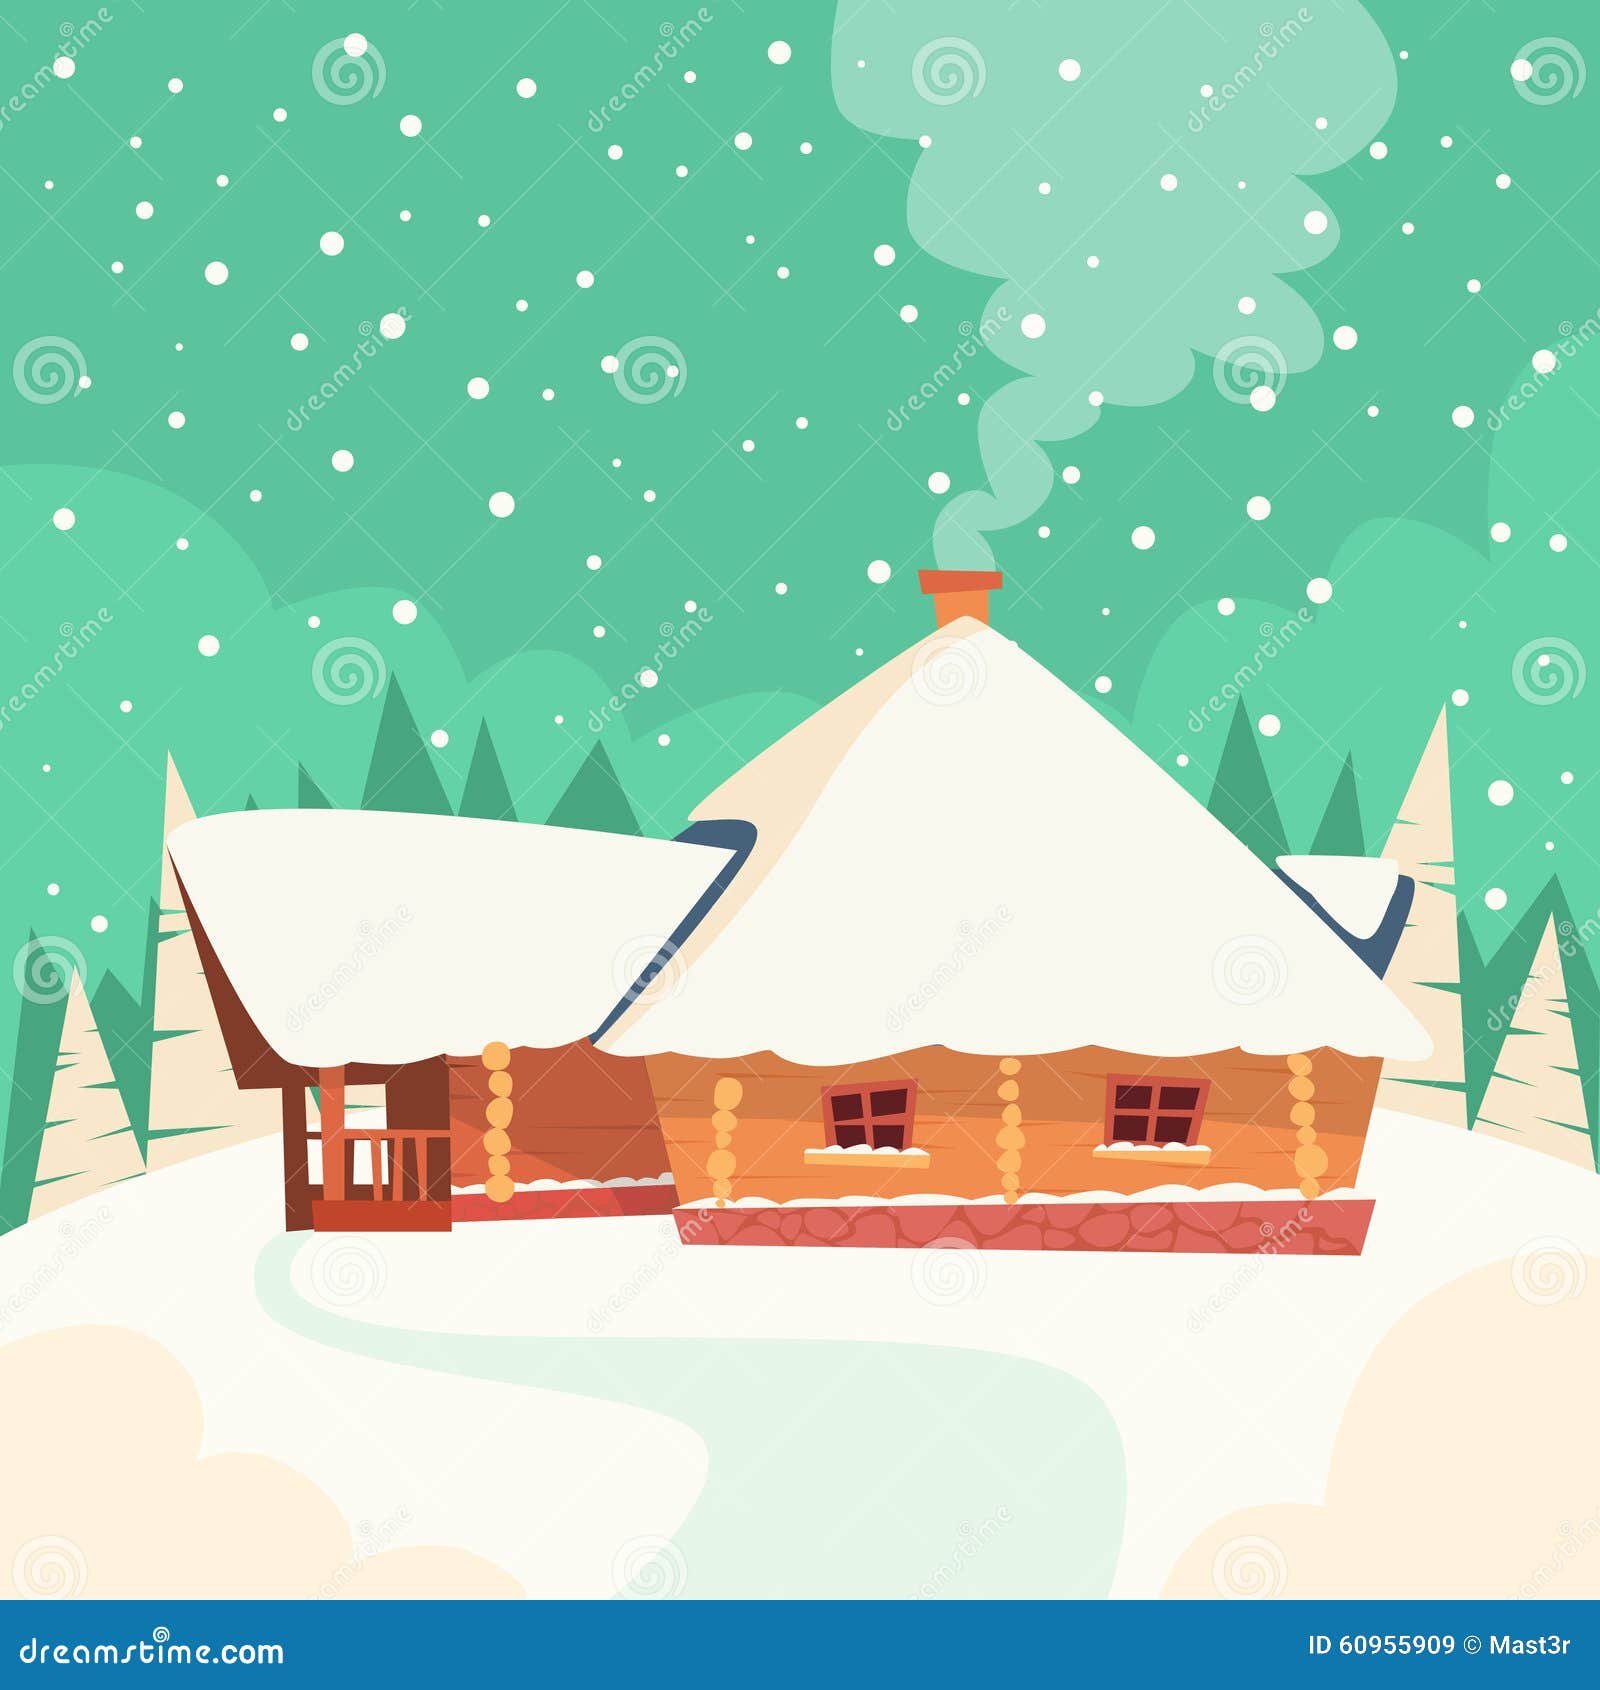 Download Winter House Snow Forest Flat Vector Stock Vector ...